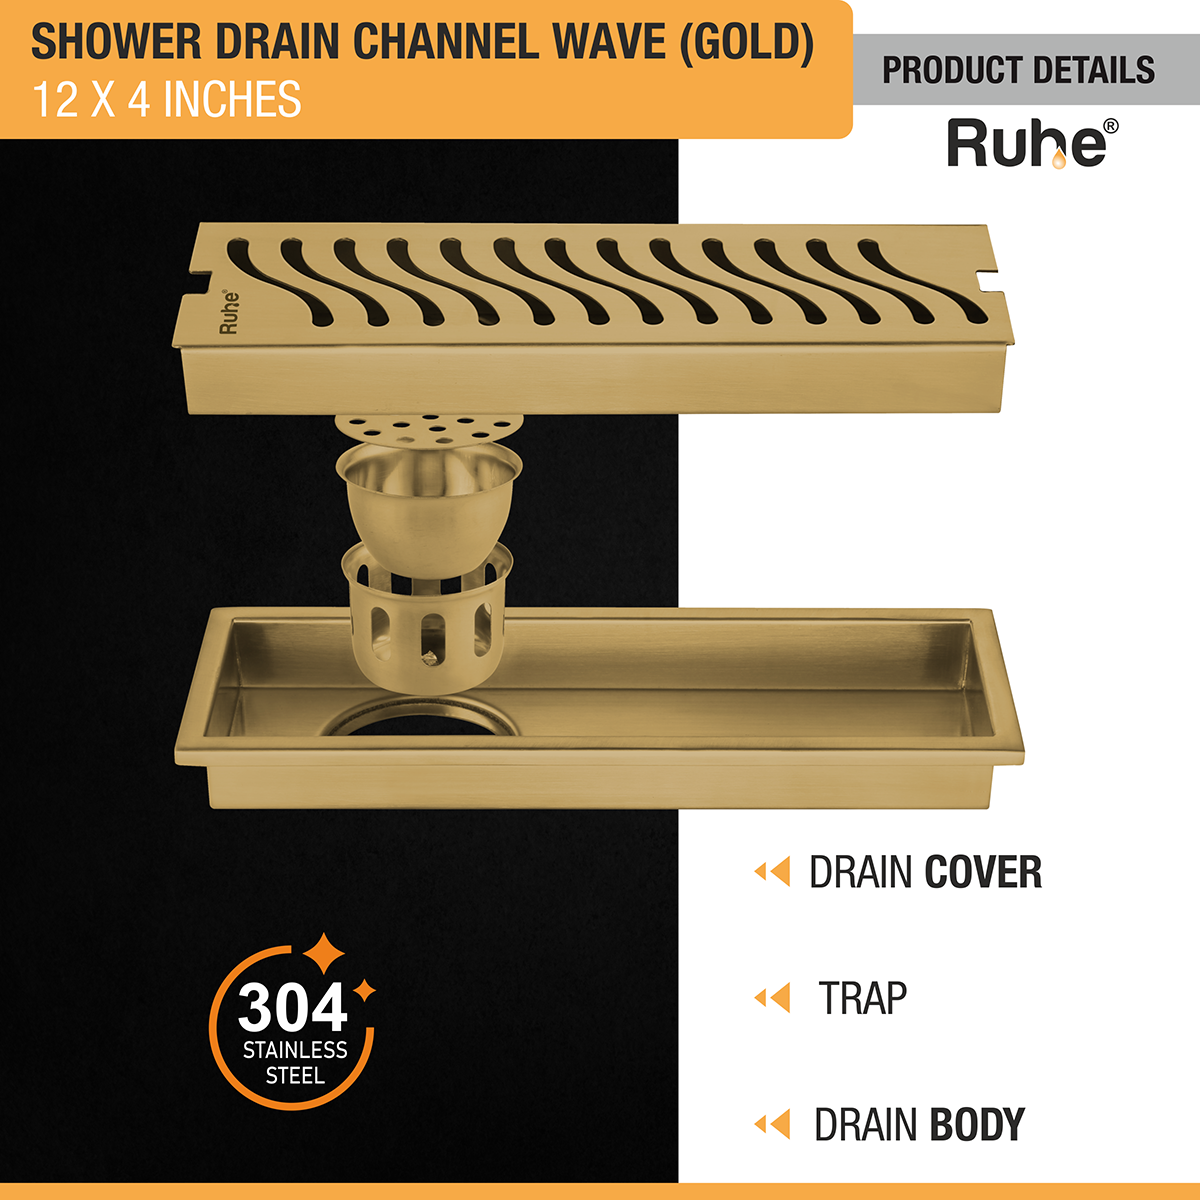 Wave Shower Drain Channel (12 x 4 Inches) YELLOW GOLD product details